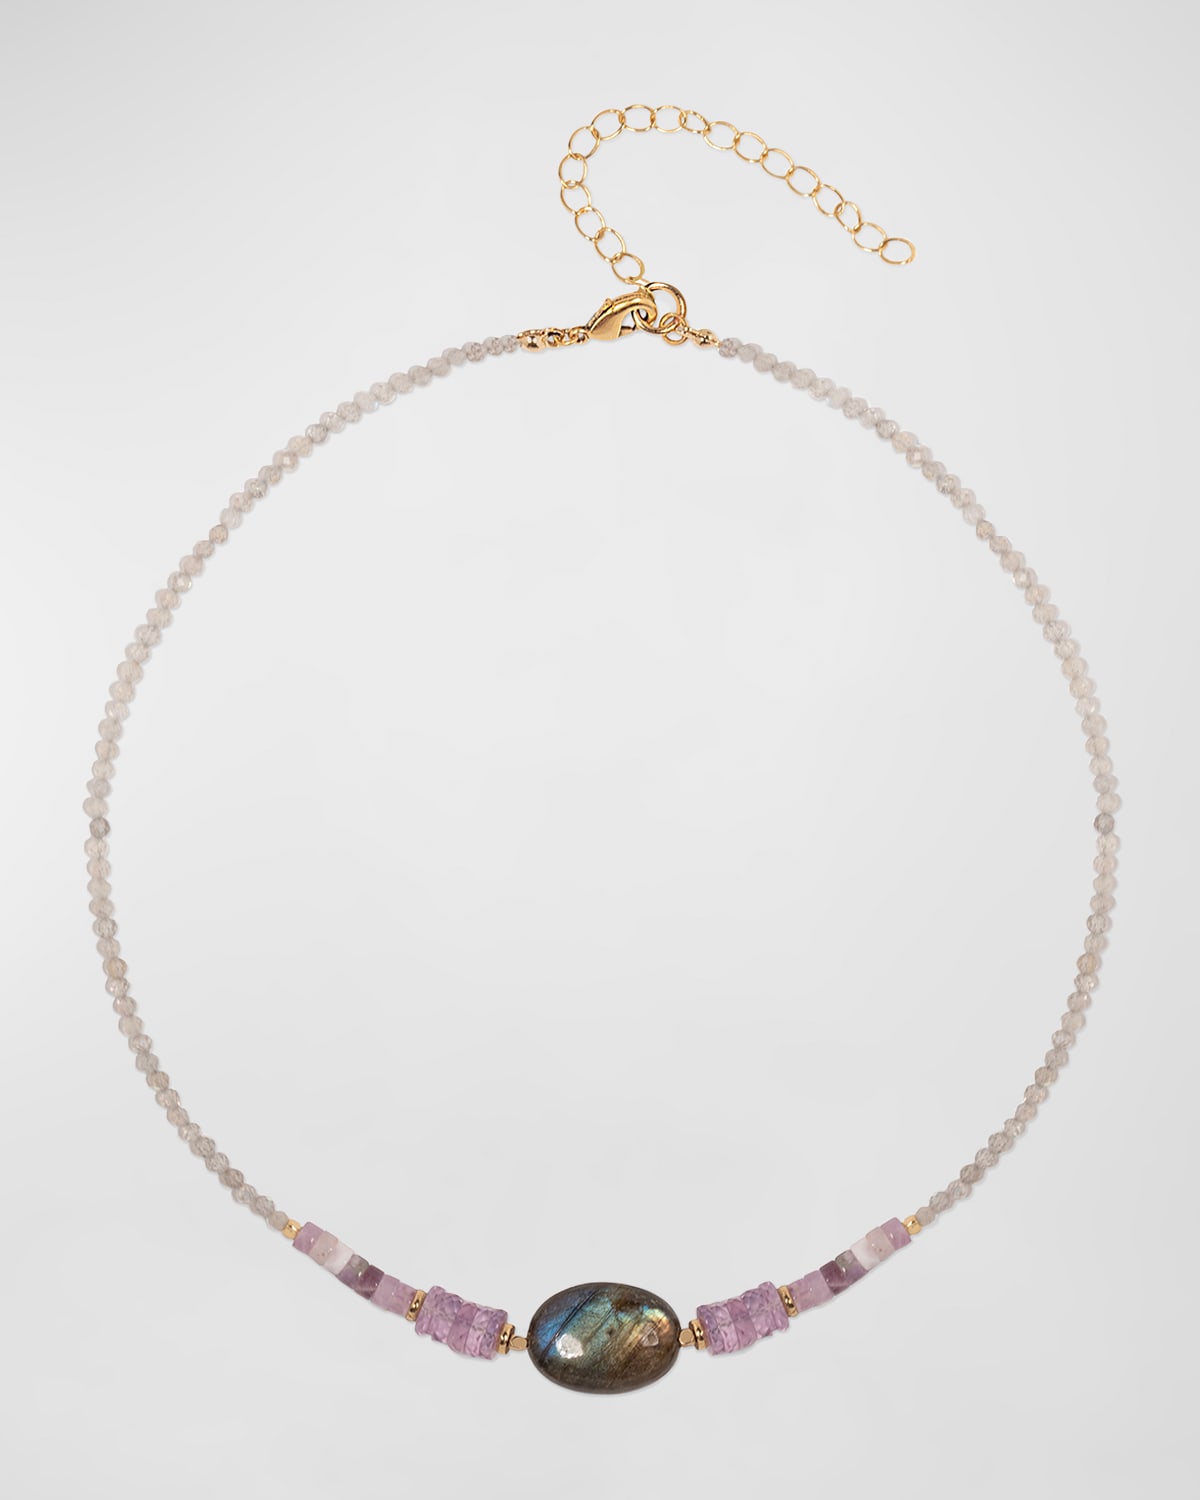 Beaded Labradorite, Lepidolite and Amethyst Necklace